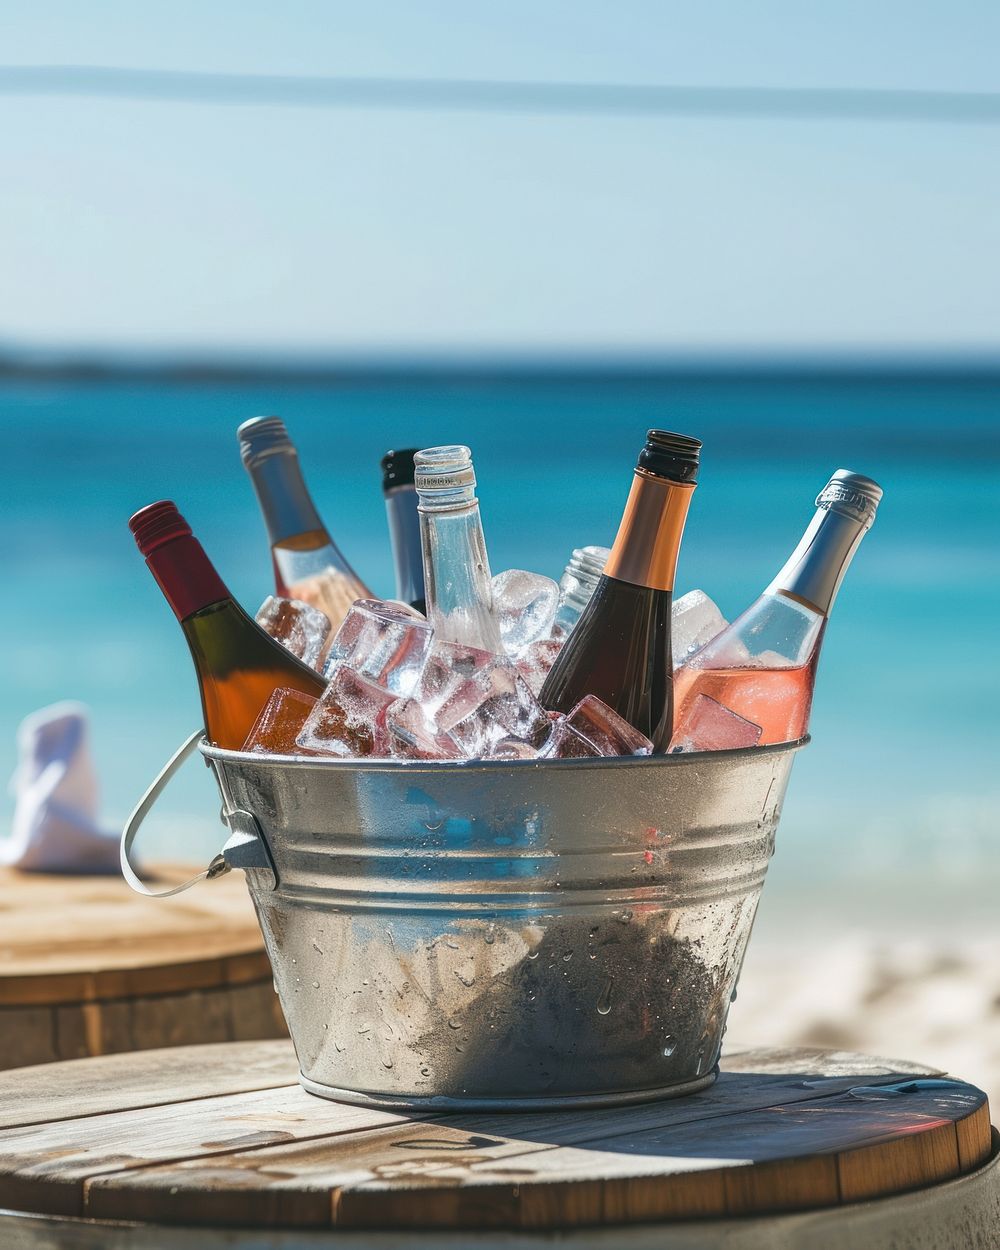 Assorted wine bottles in a metal bucket full of ice put on wood table against beach view outdoors vacation summer.